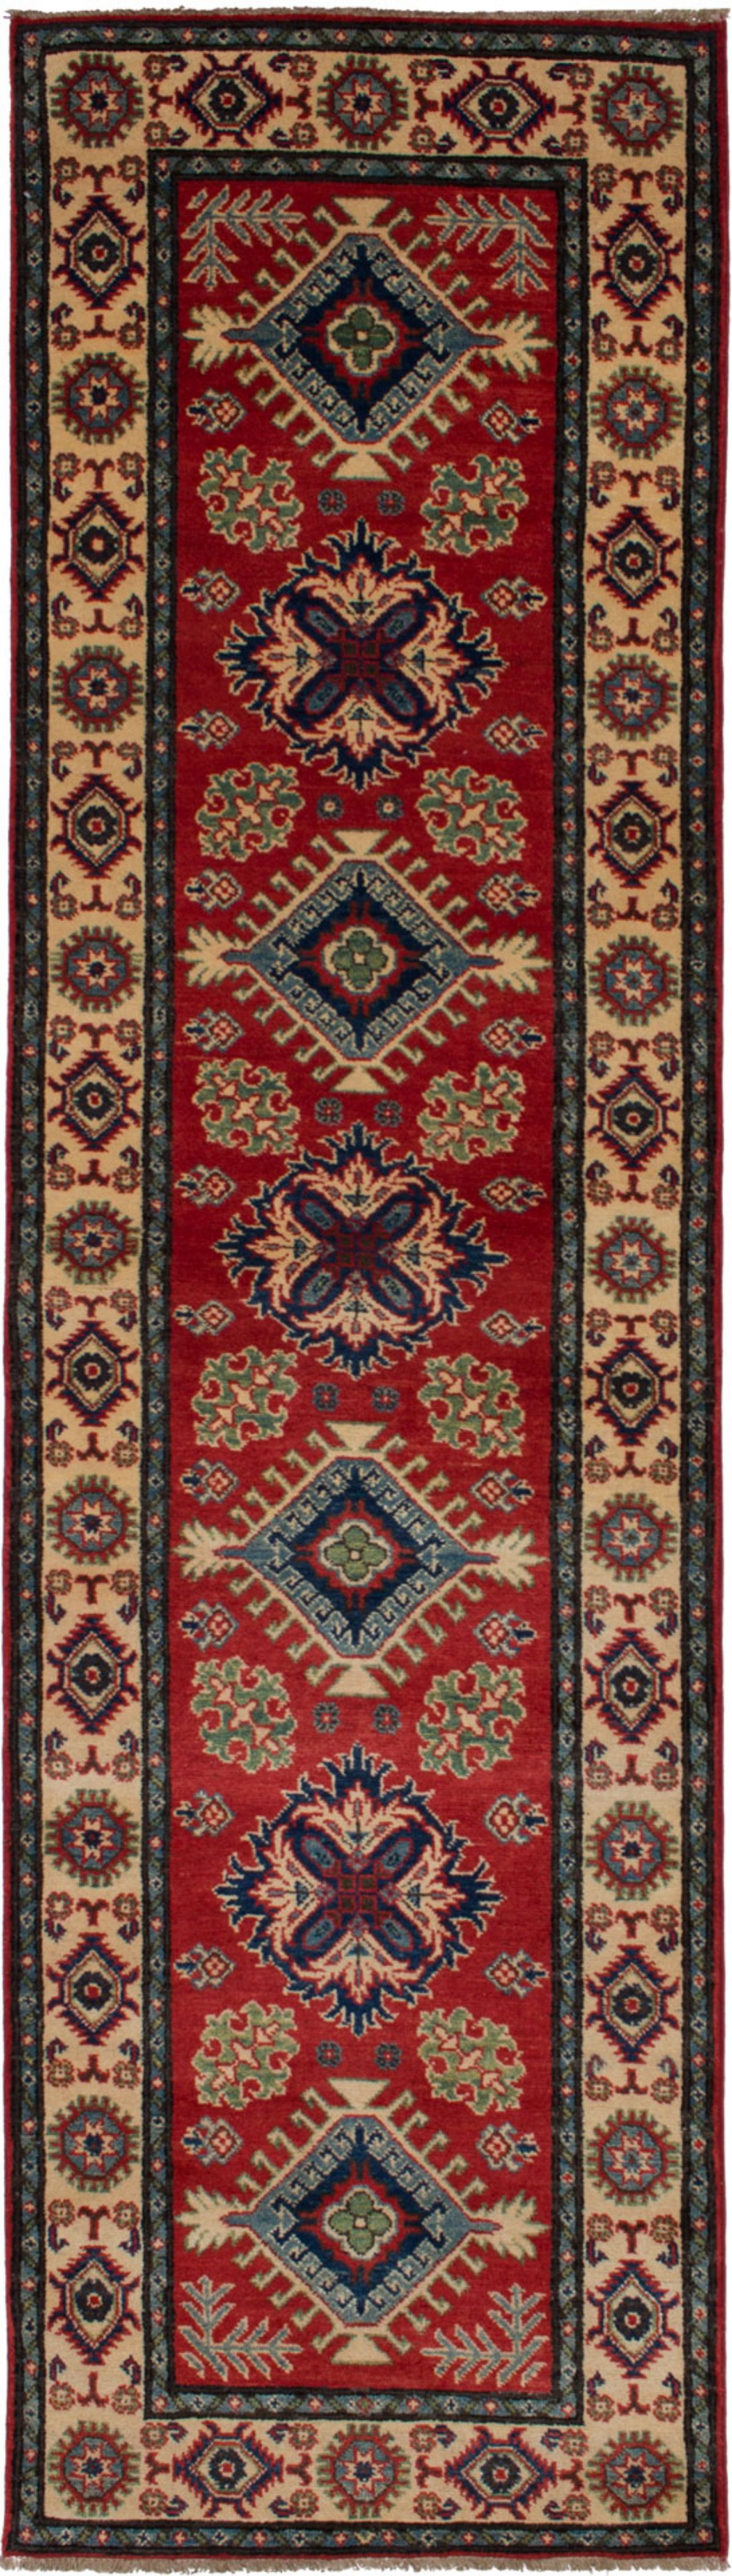 Hand-knotted Finest Gazni Red Wool Rug 2'9" x 9'10"  Size: 2'9" x 9'10"  